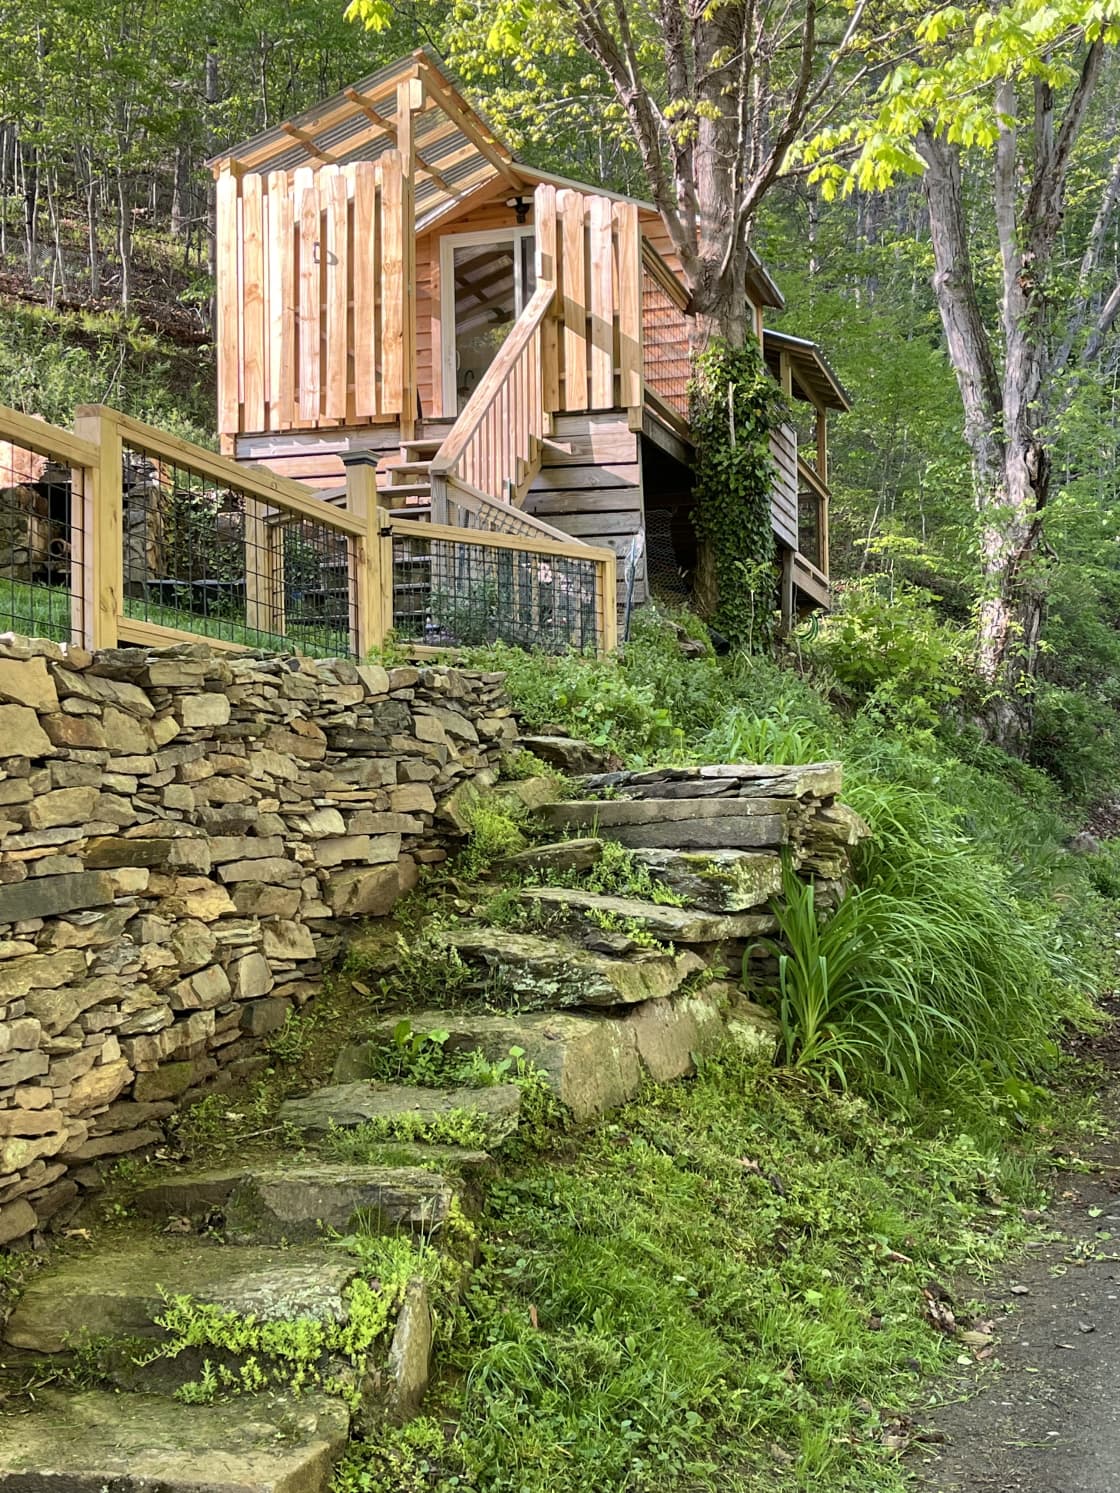 Stone steps to the cabin